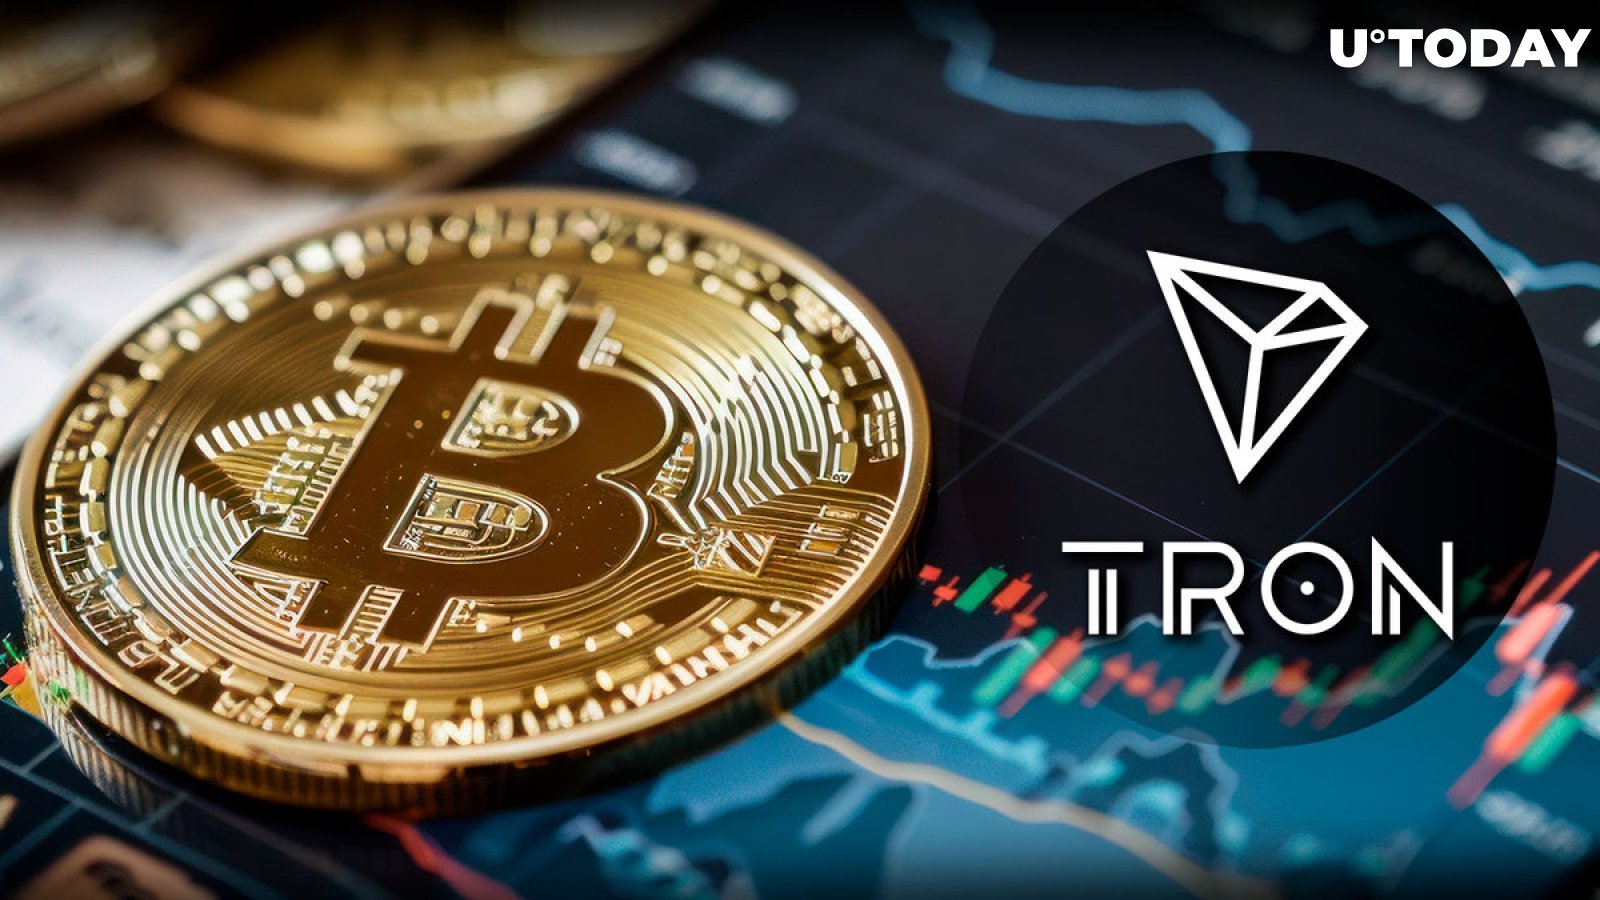 Tron DAO unexpectedly transfers $65 million in Bitcoin to an unknown entity